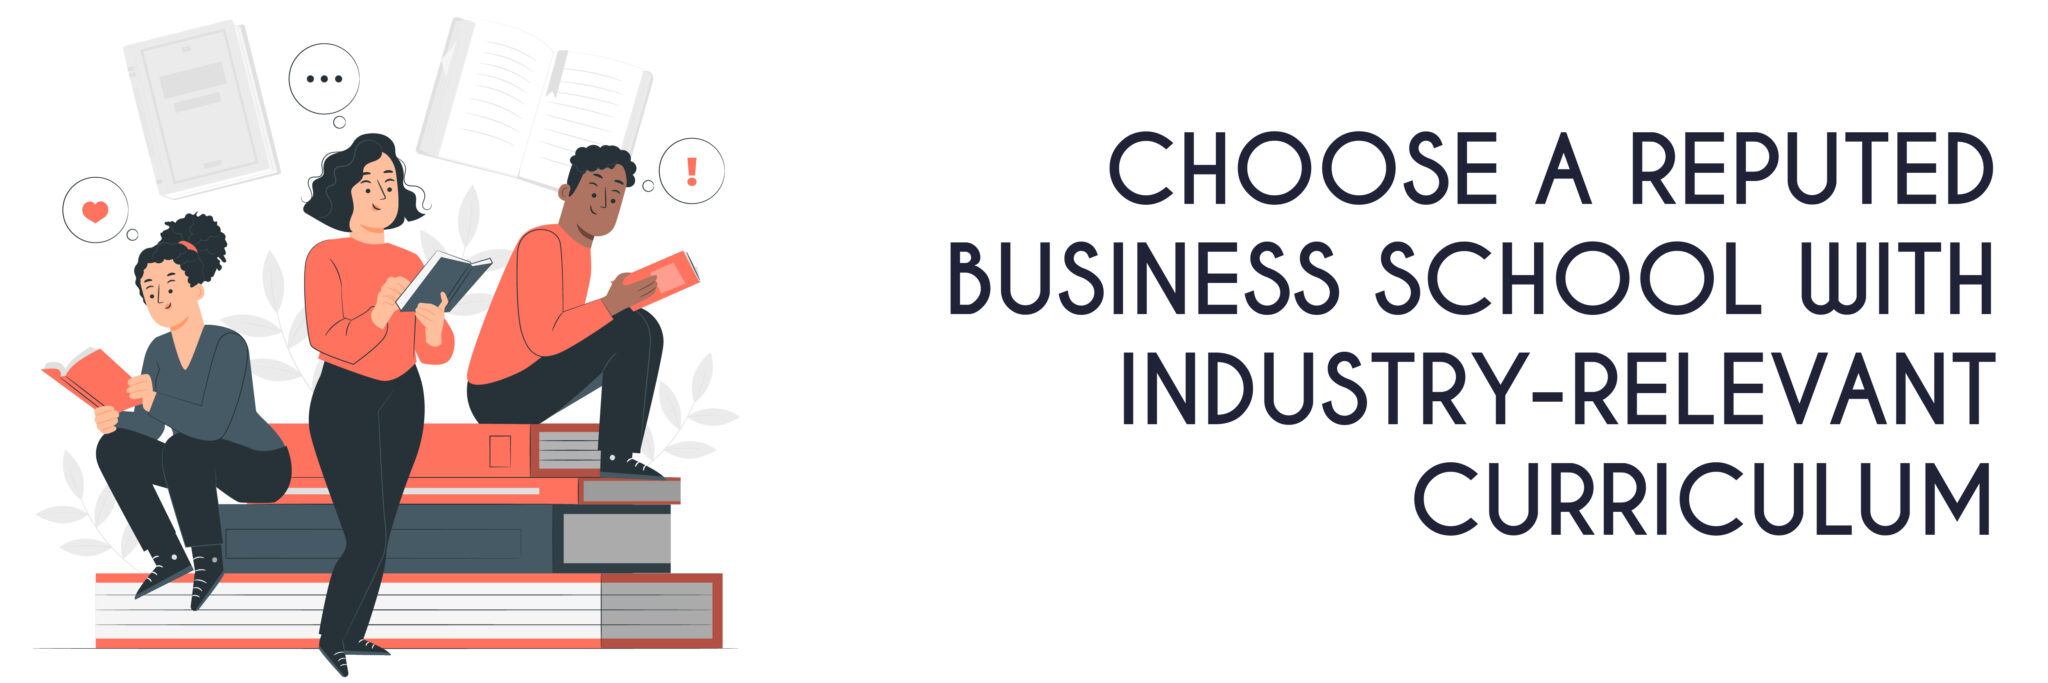 Choose a Reputed Business School with Industry-Relevant Curriculum